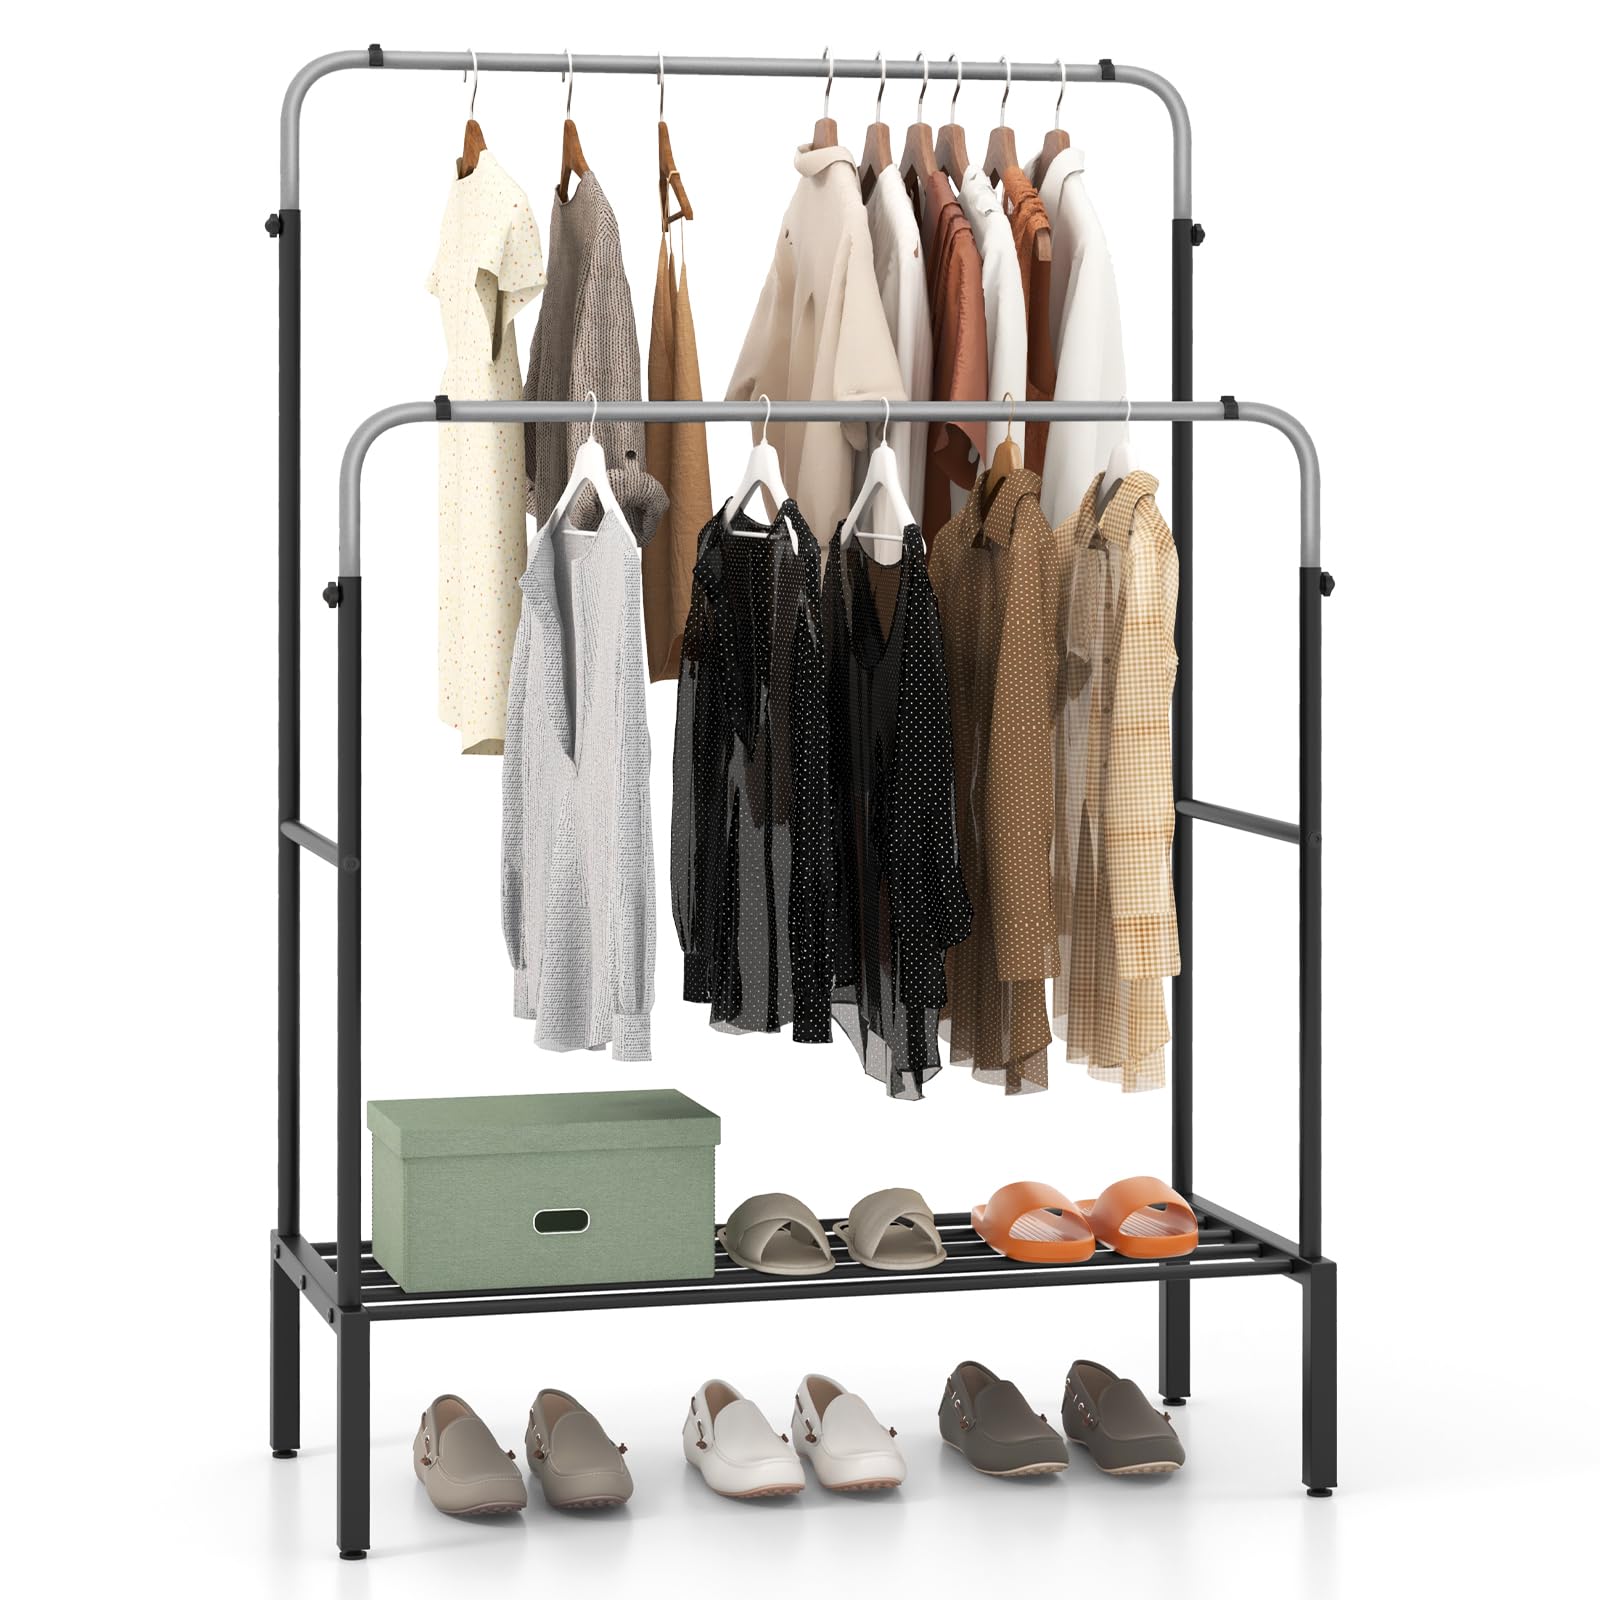 Giantex Double Rods Garment Rack, 2 Heights Adjustable Clothing Rack, Heavy Duty Metal Frame Hanging Clothes Rack